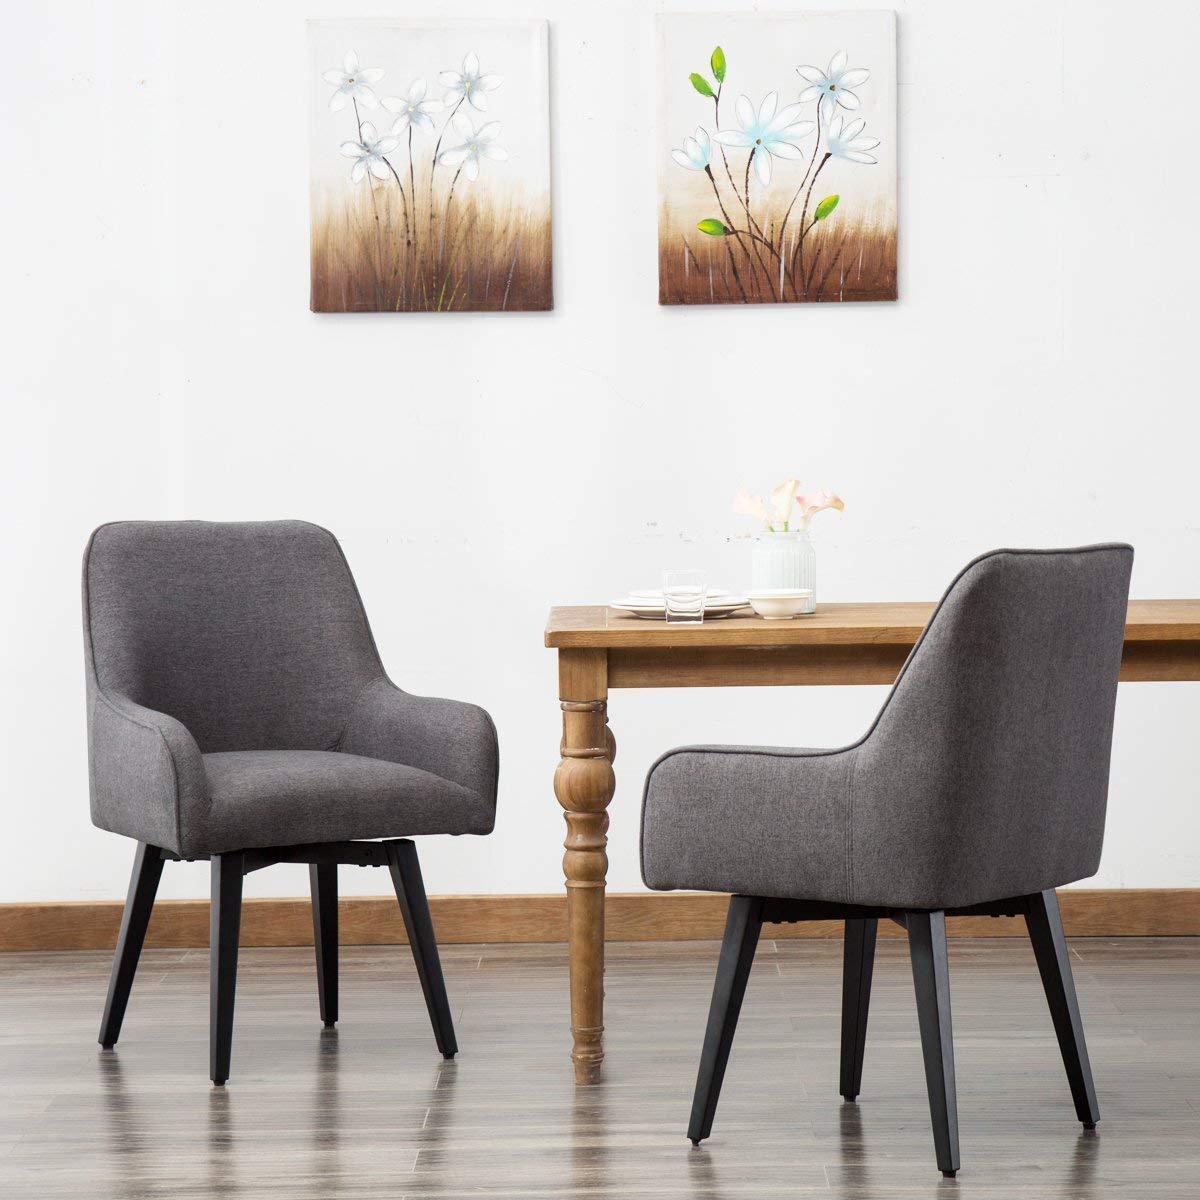 How To Make Dining Chairs More Comfortable